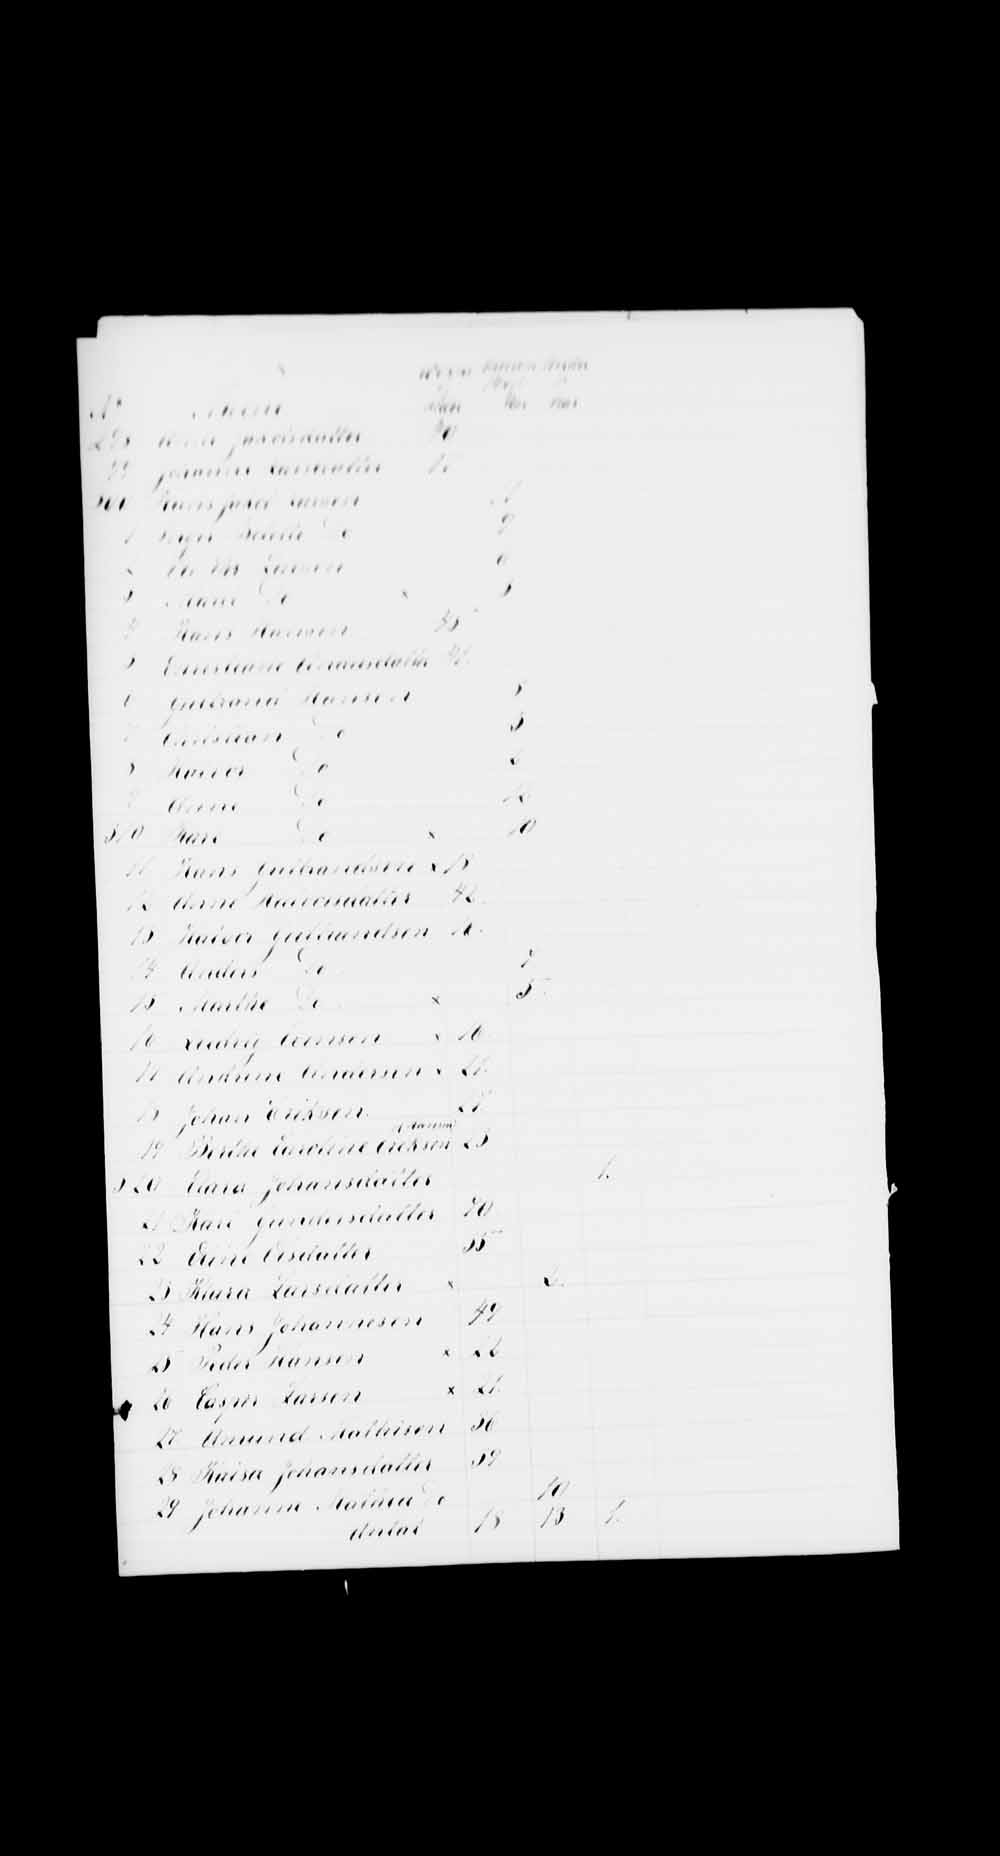 Digitized page of Passenger Lists for Image No.: e003530324